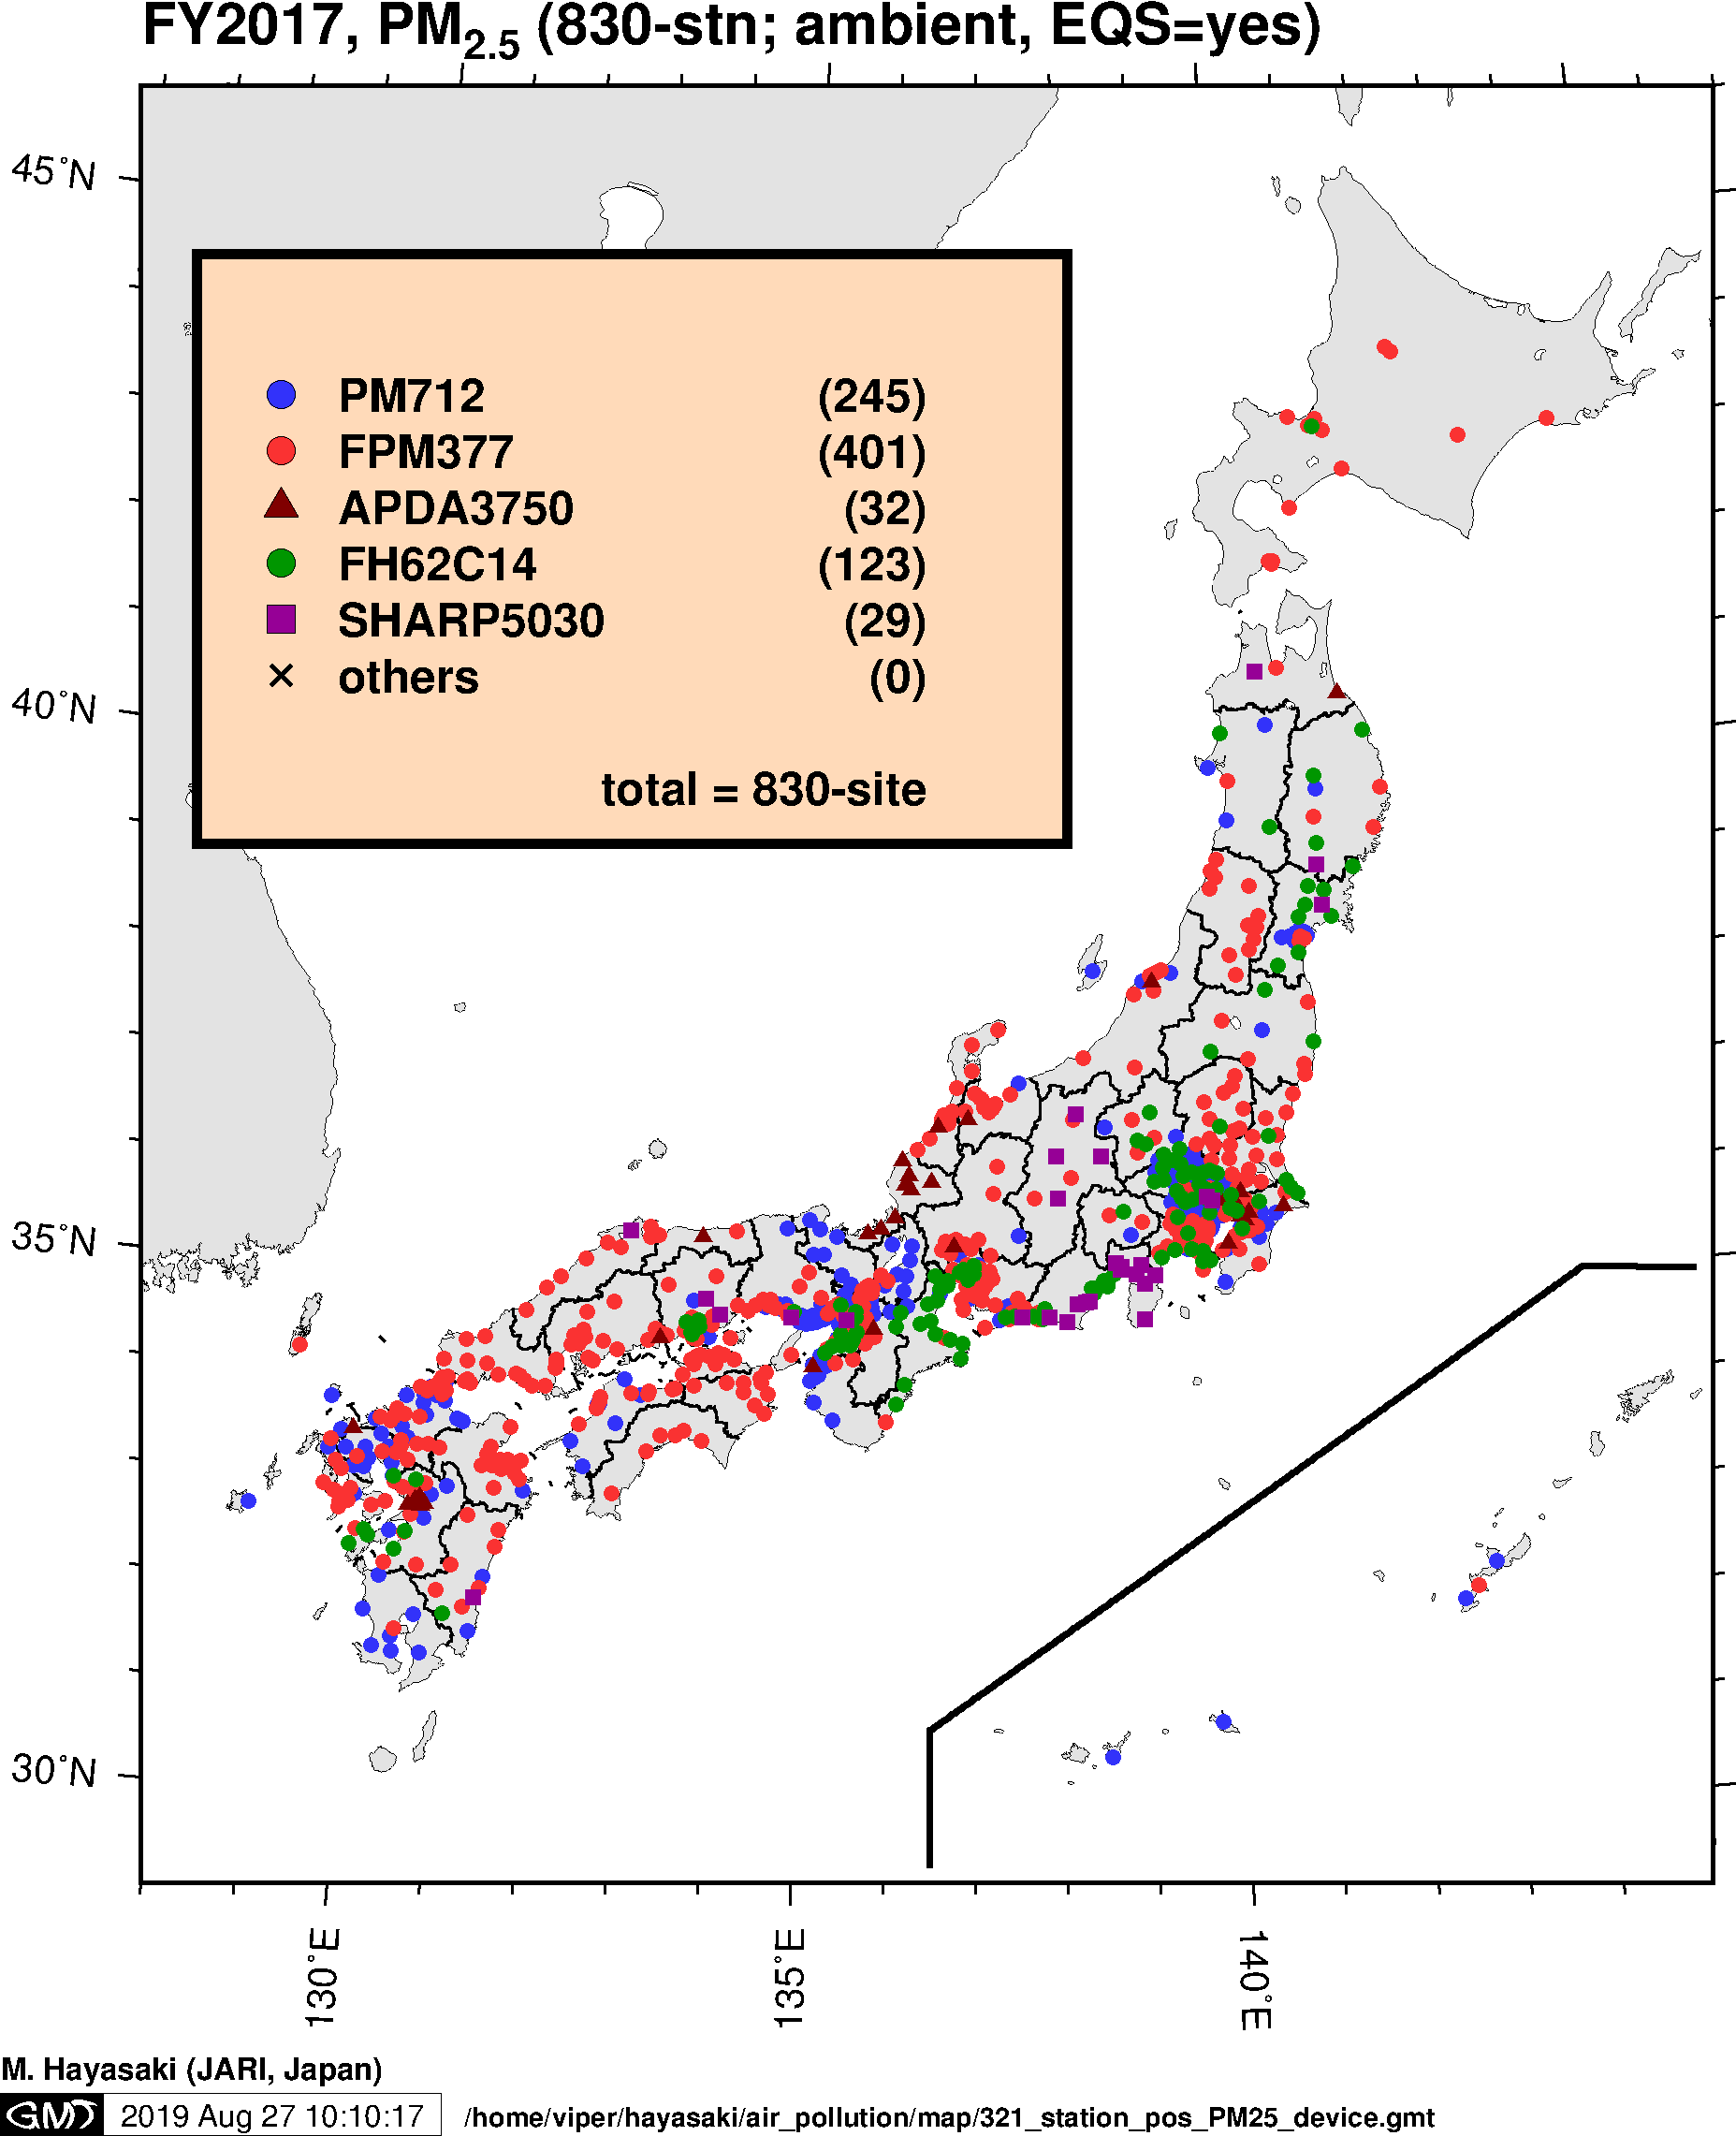 PM2.5 Monitoring devices in Japan (FY2017)